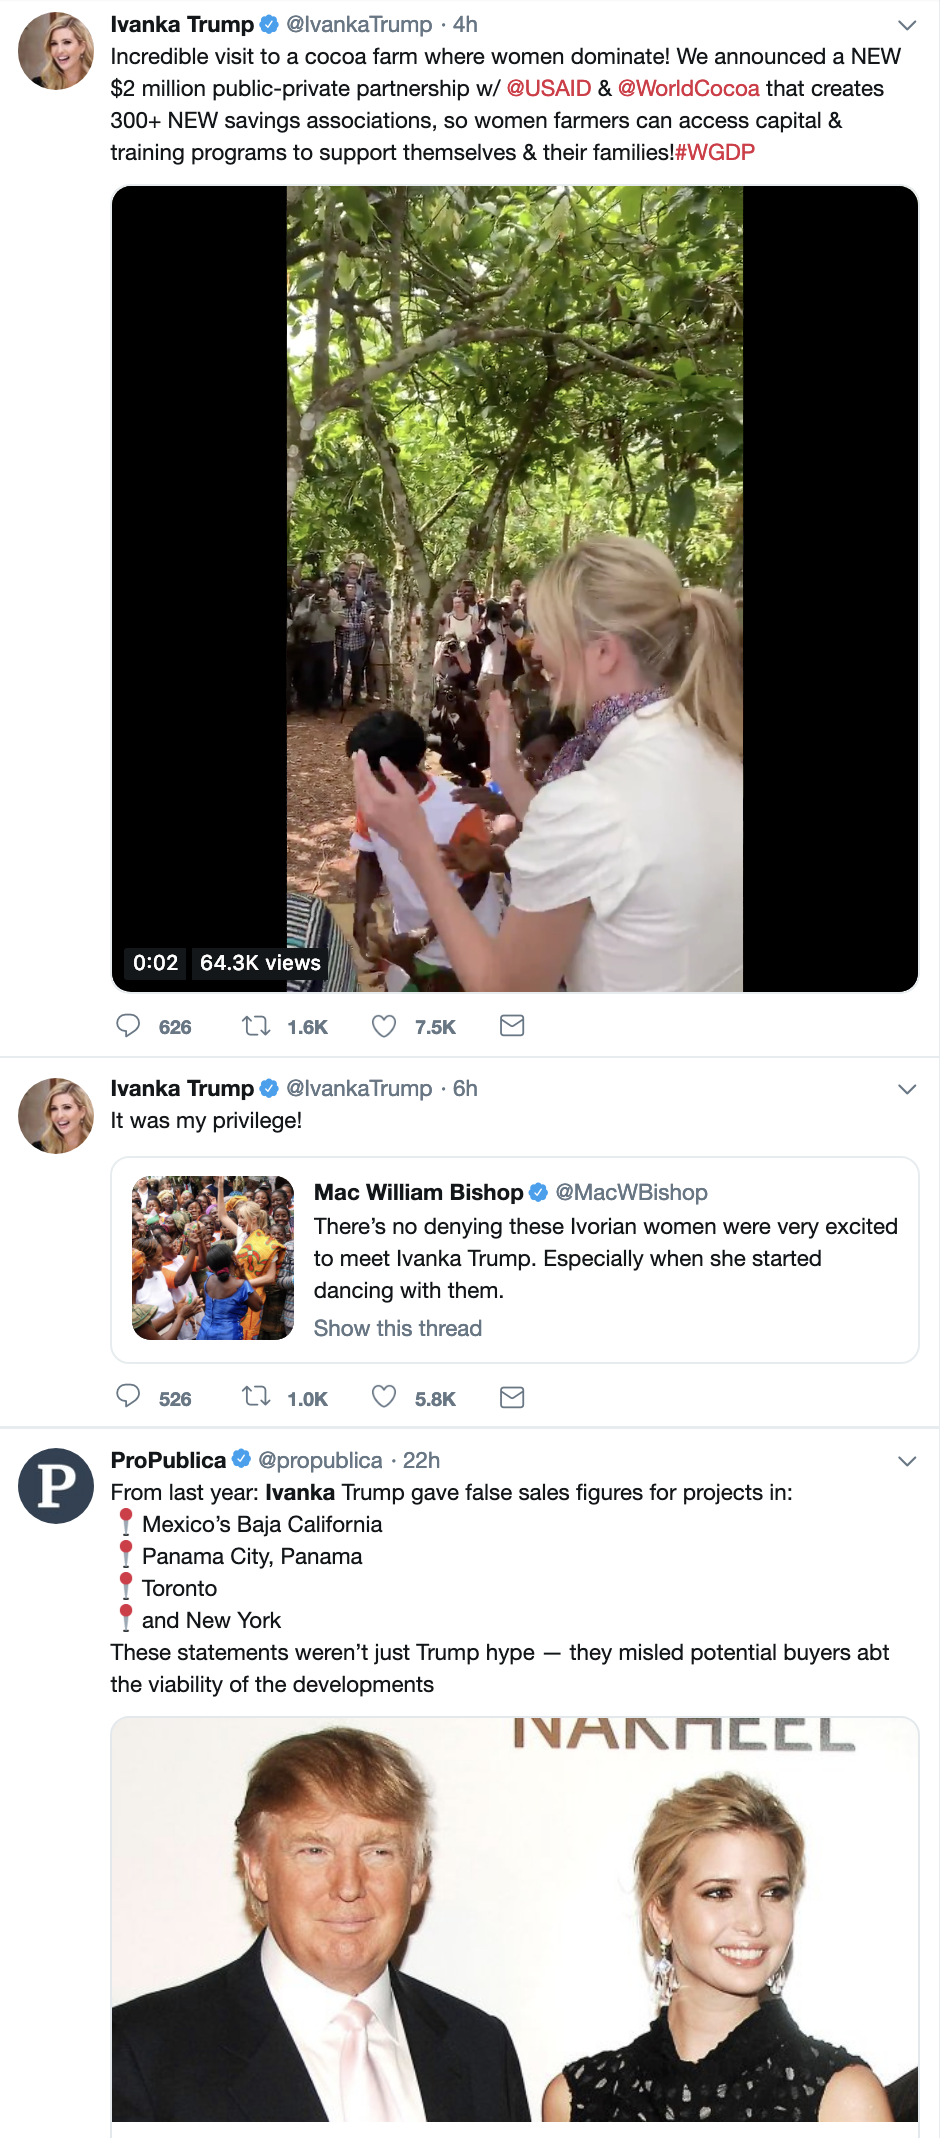 Screen-Shot-2019-04-17-at-3.41.25-PM Ivanka Trump Job Offer Announcement Made By 'The Atlantic' Donald Trump Economy Feminism Foreign Policy Politics Top Stories 